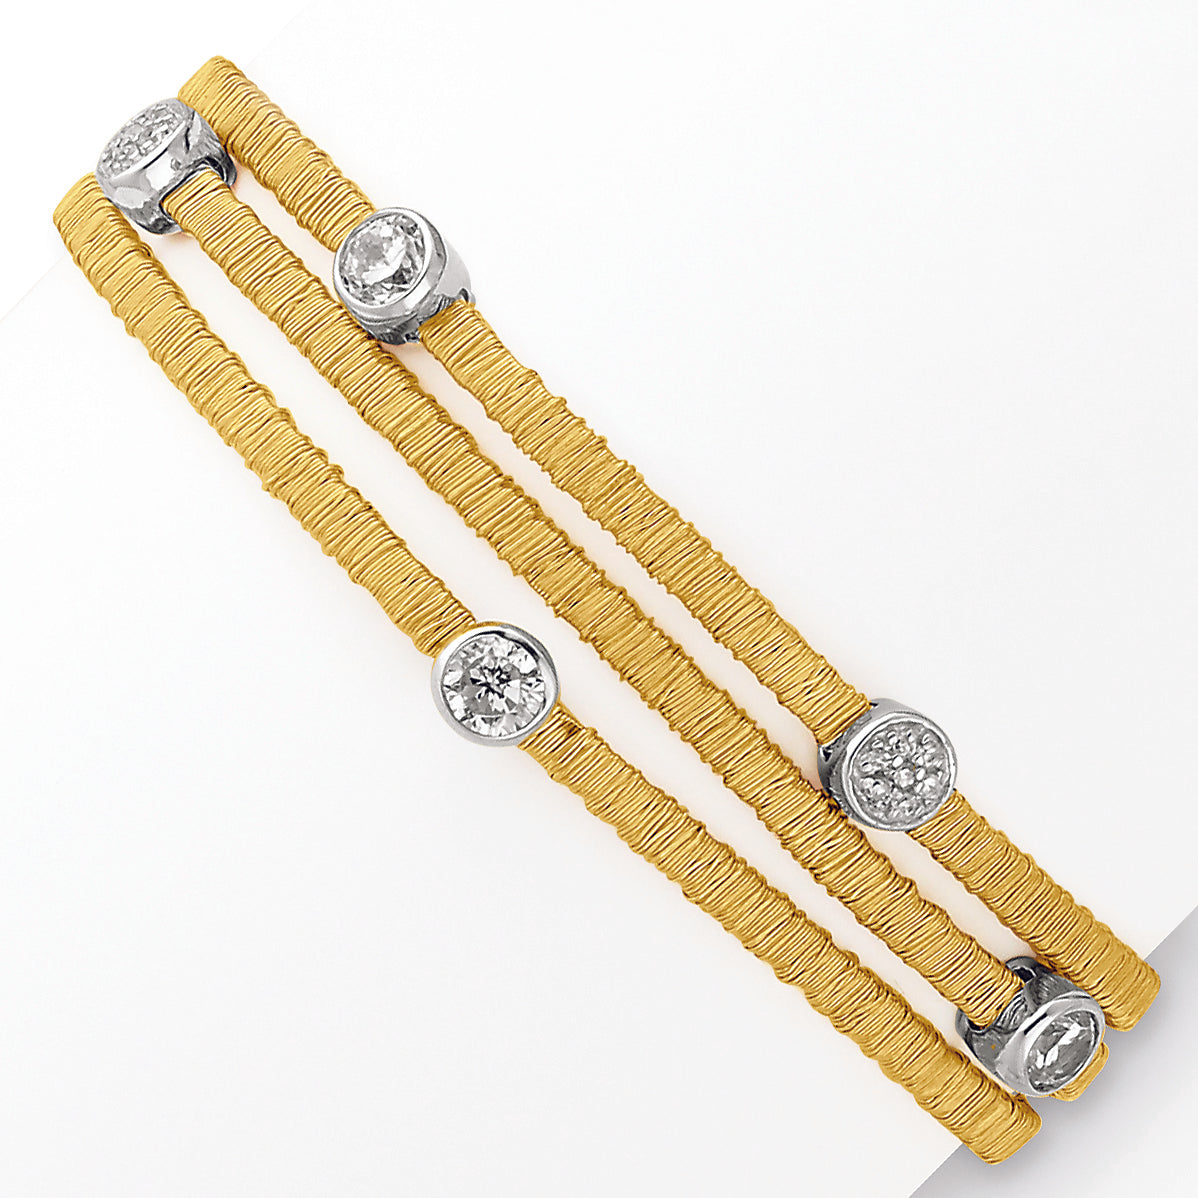 Stainless Steel & Sterling Silver Gold-Plated CZ Bracelet